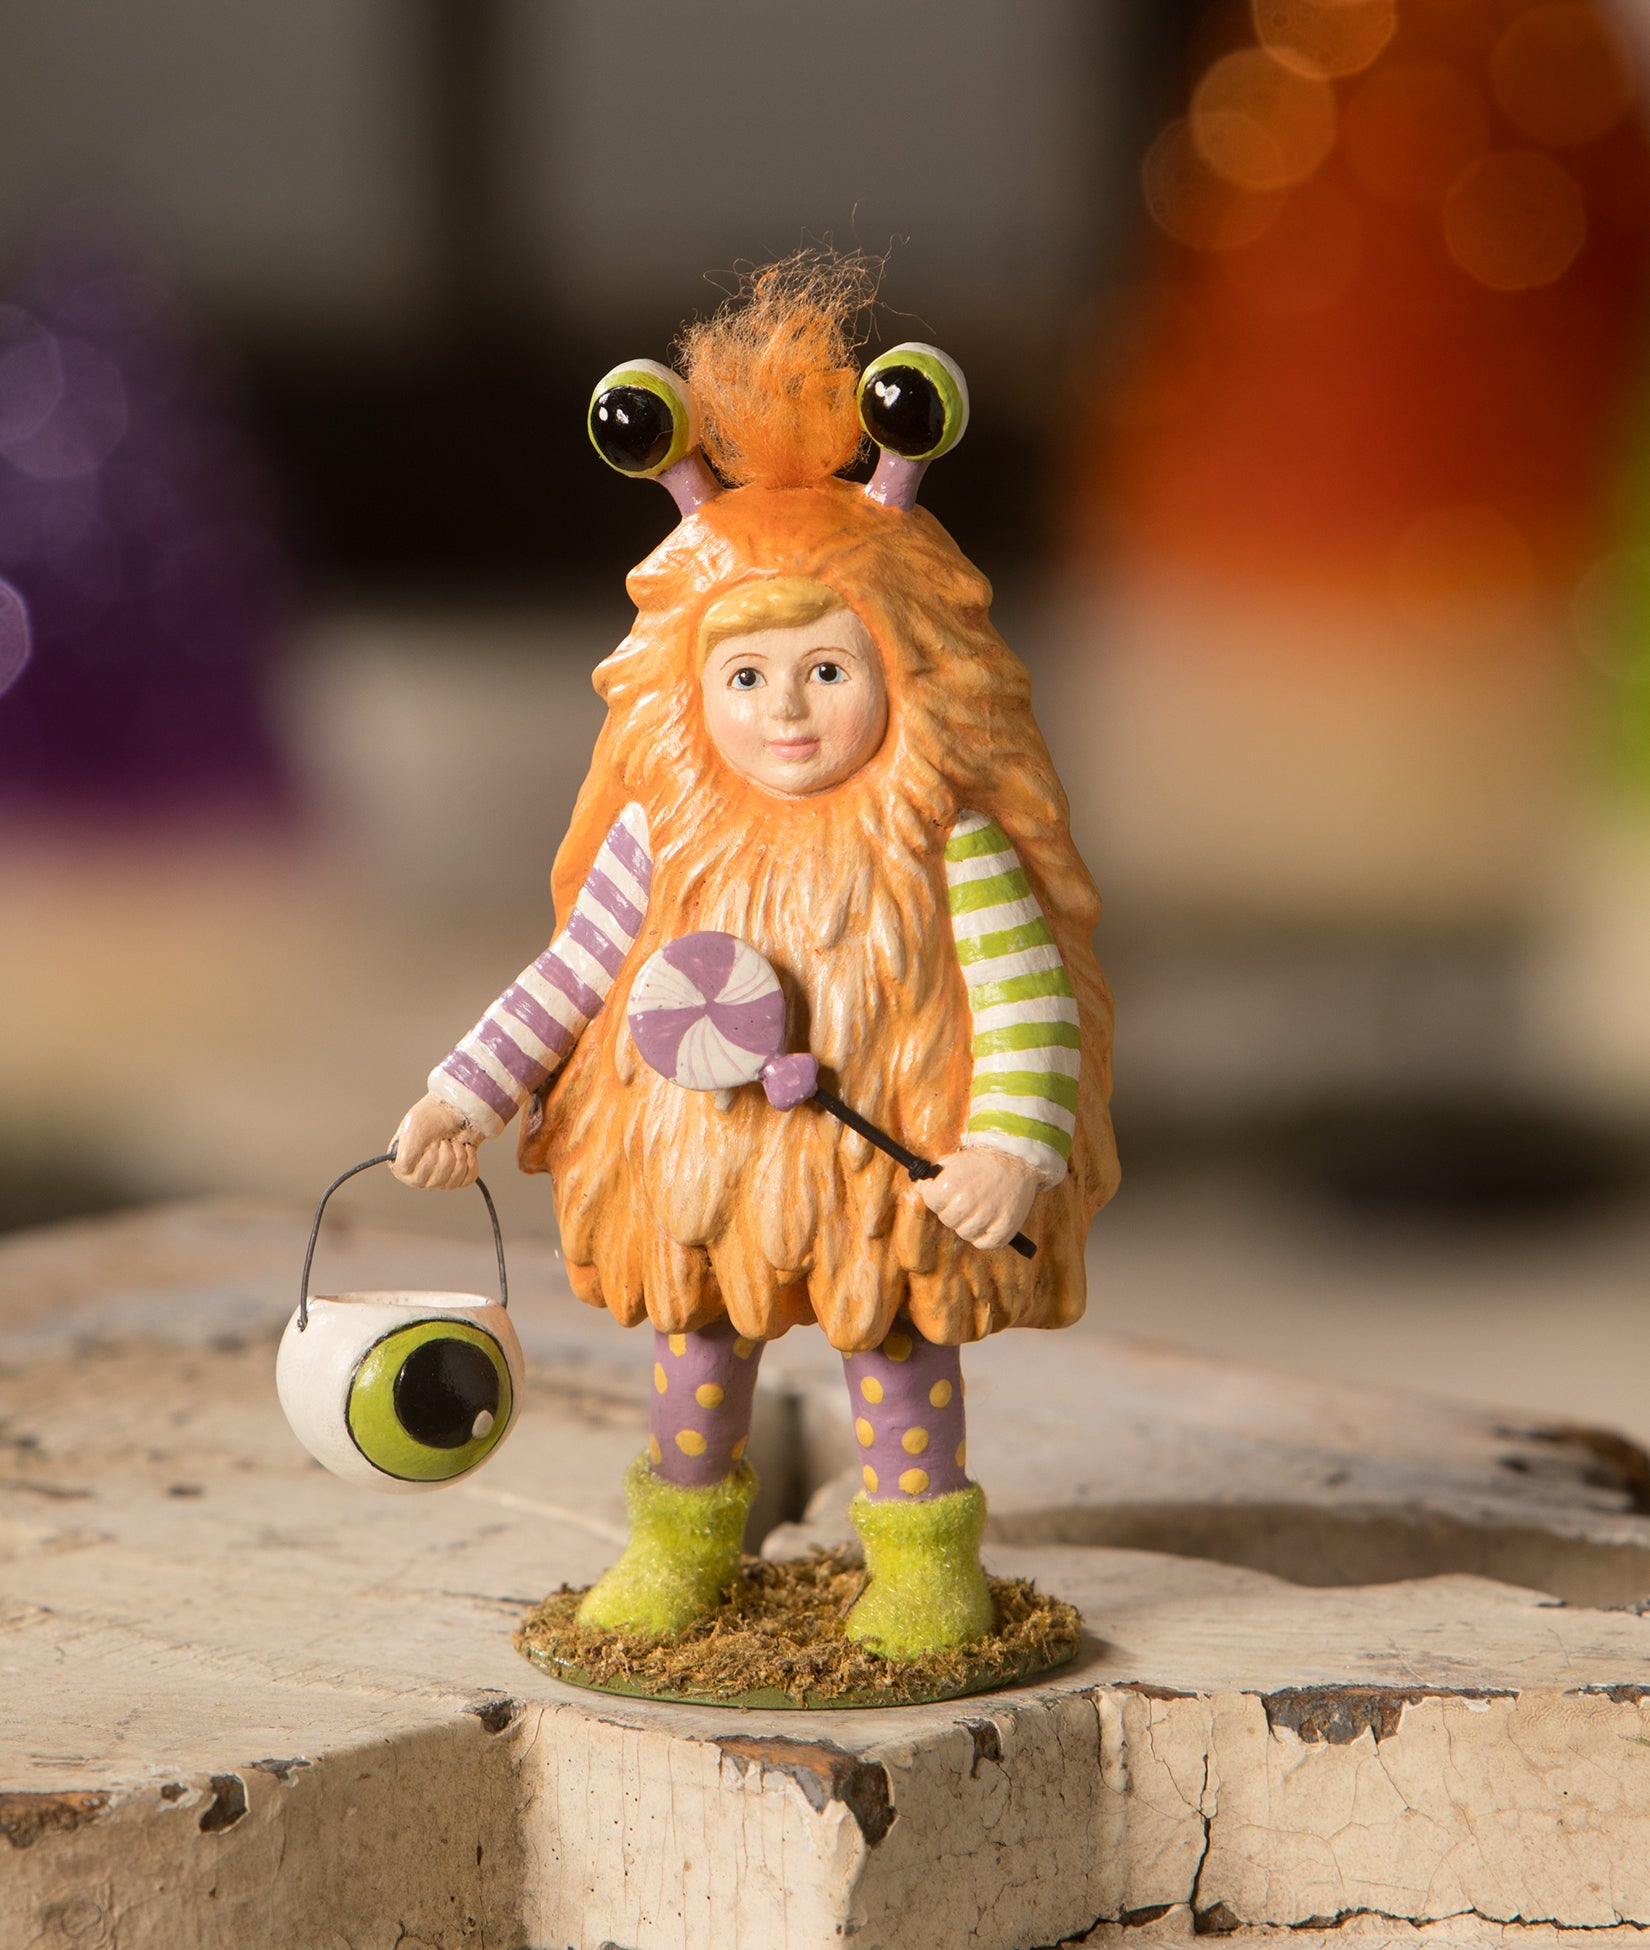 Maddie Monster Figurine by Bethany Lowe